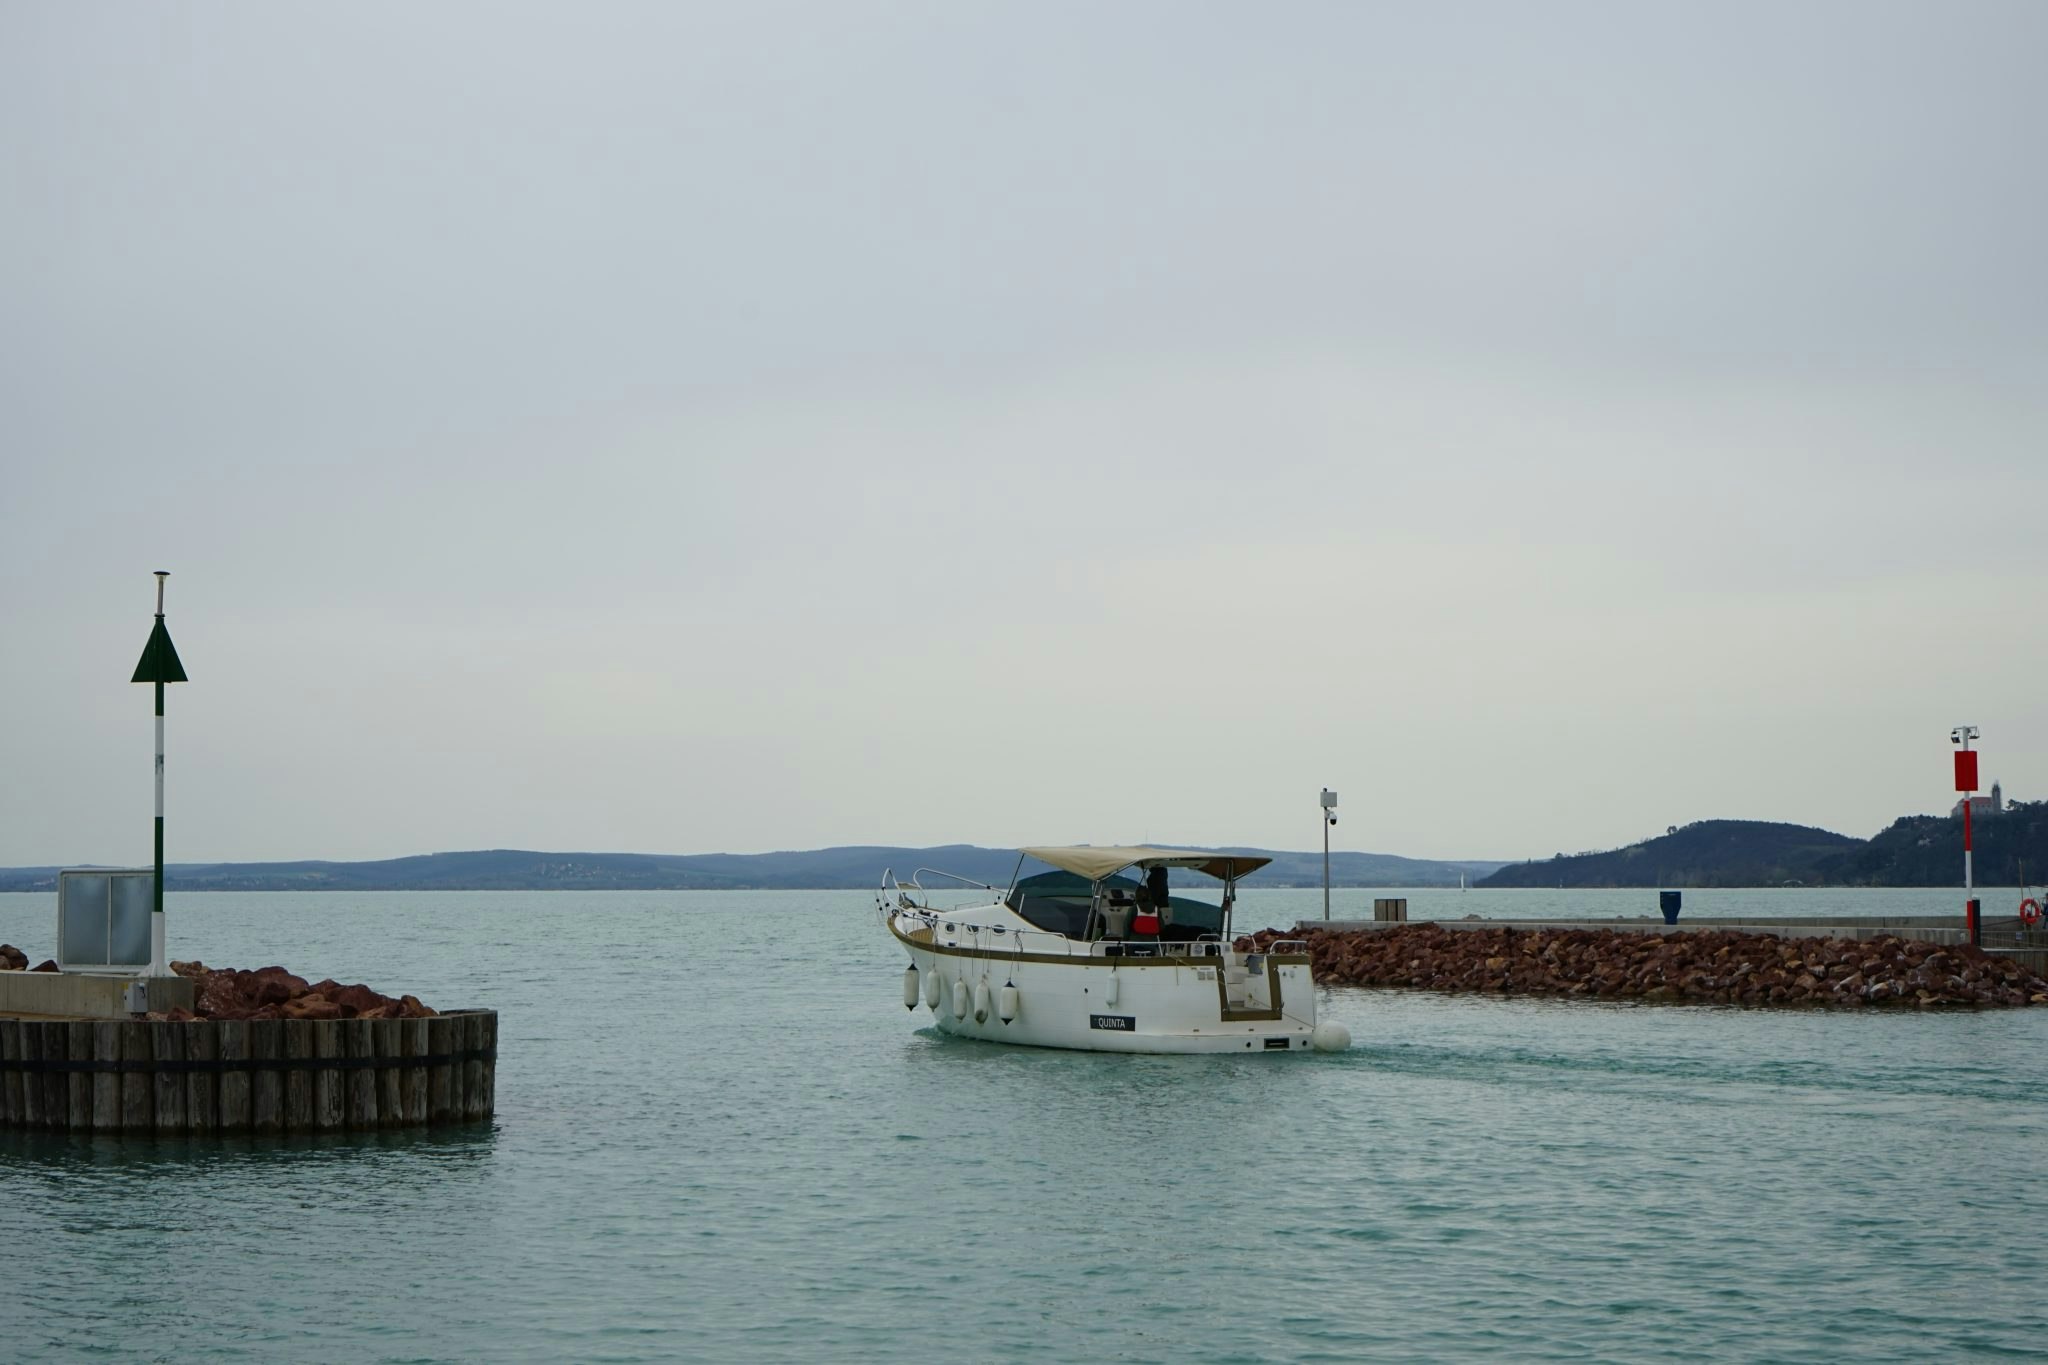 A boat leaves a small port on Lake Balaton in Hungary.